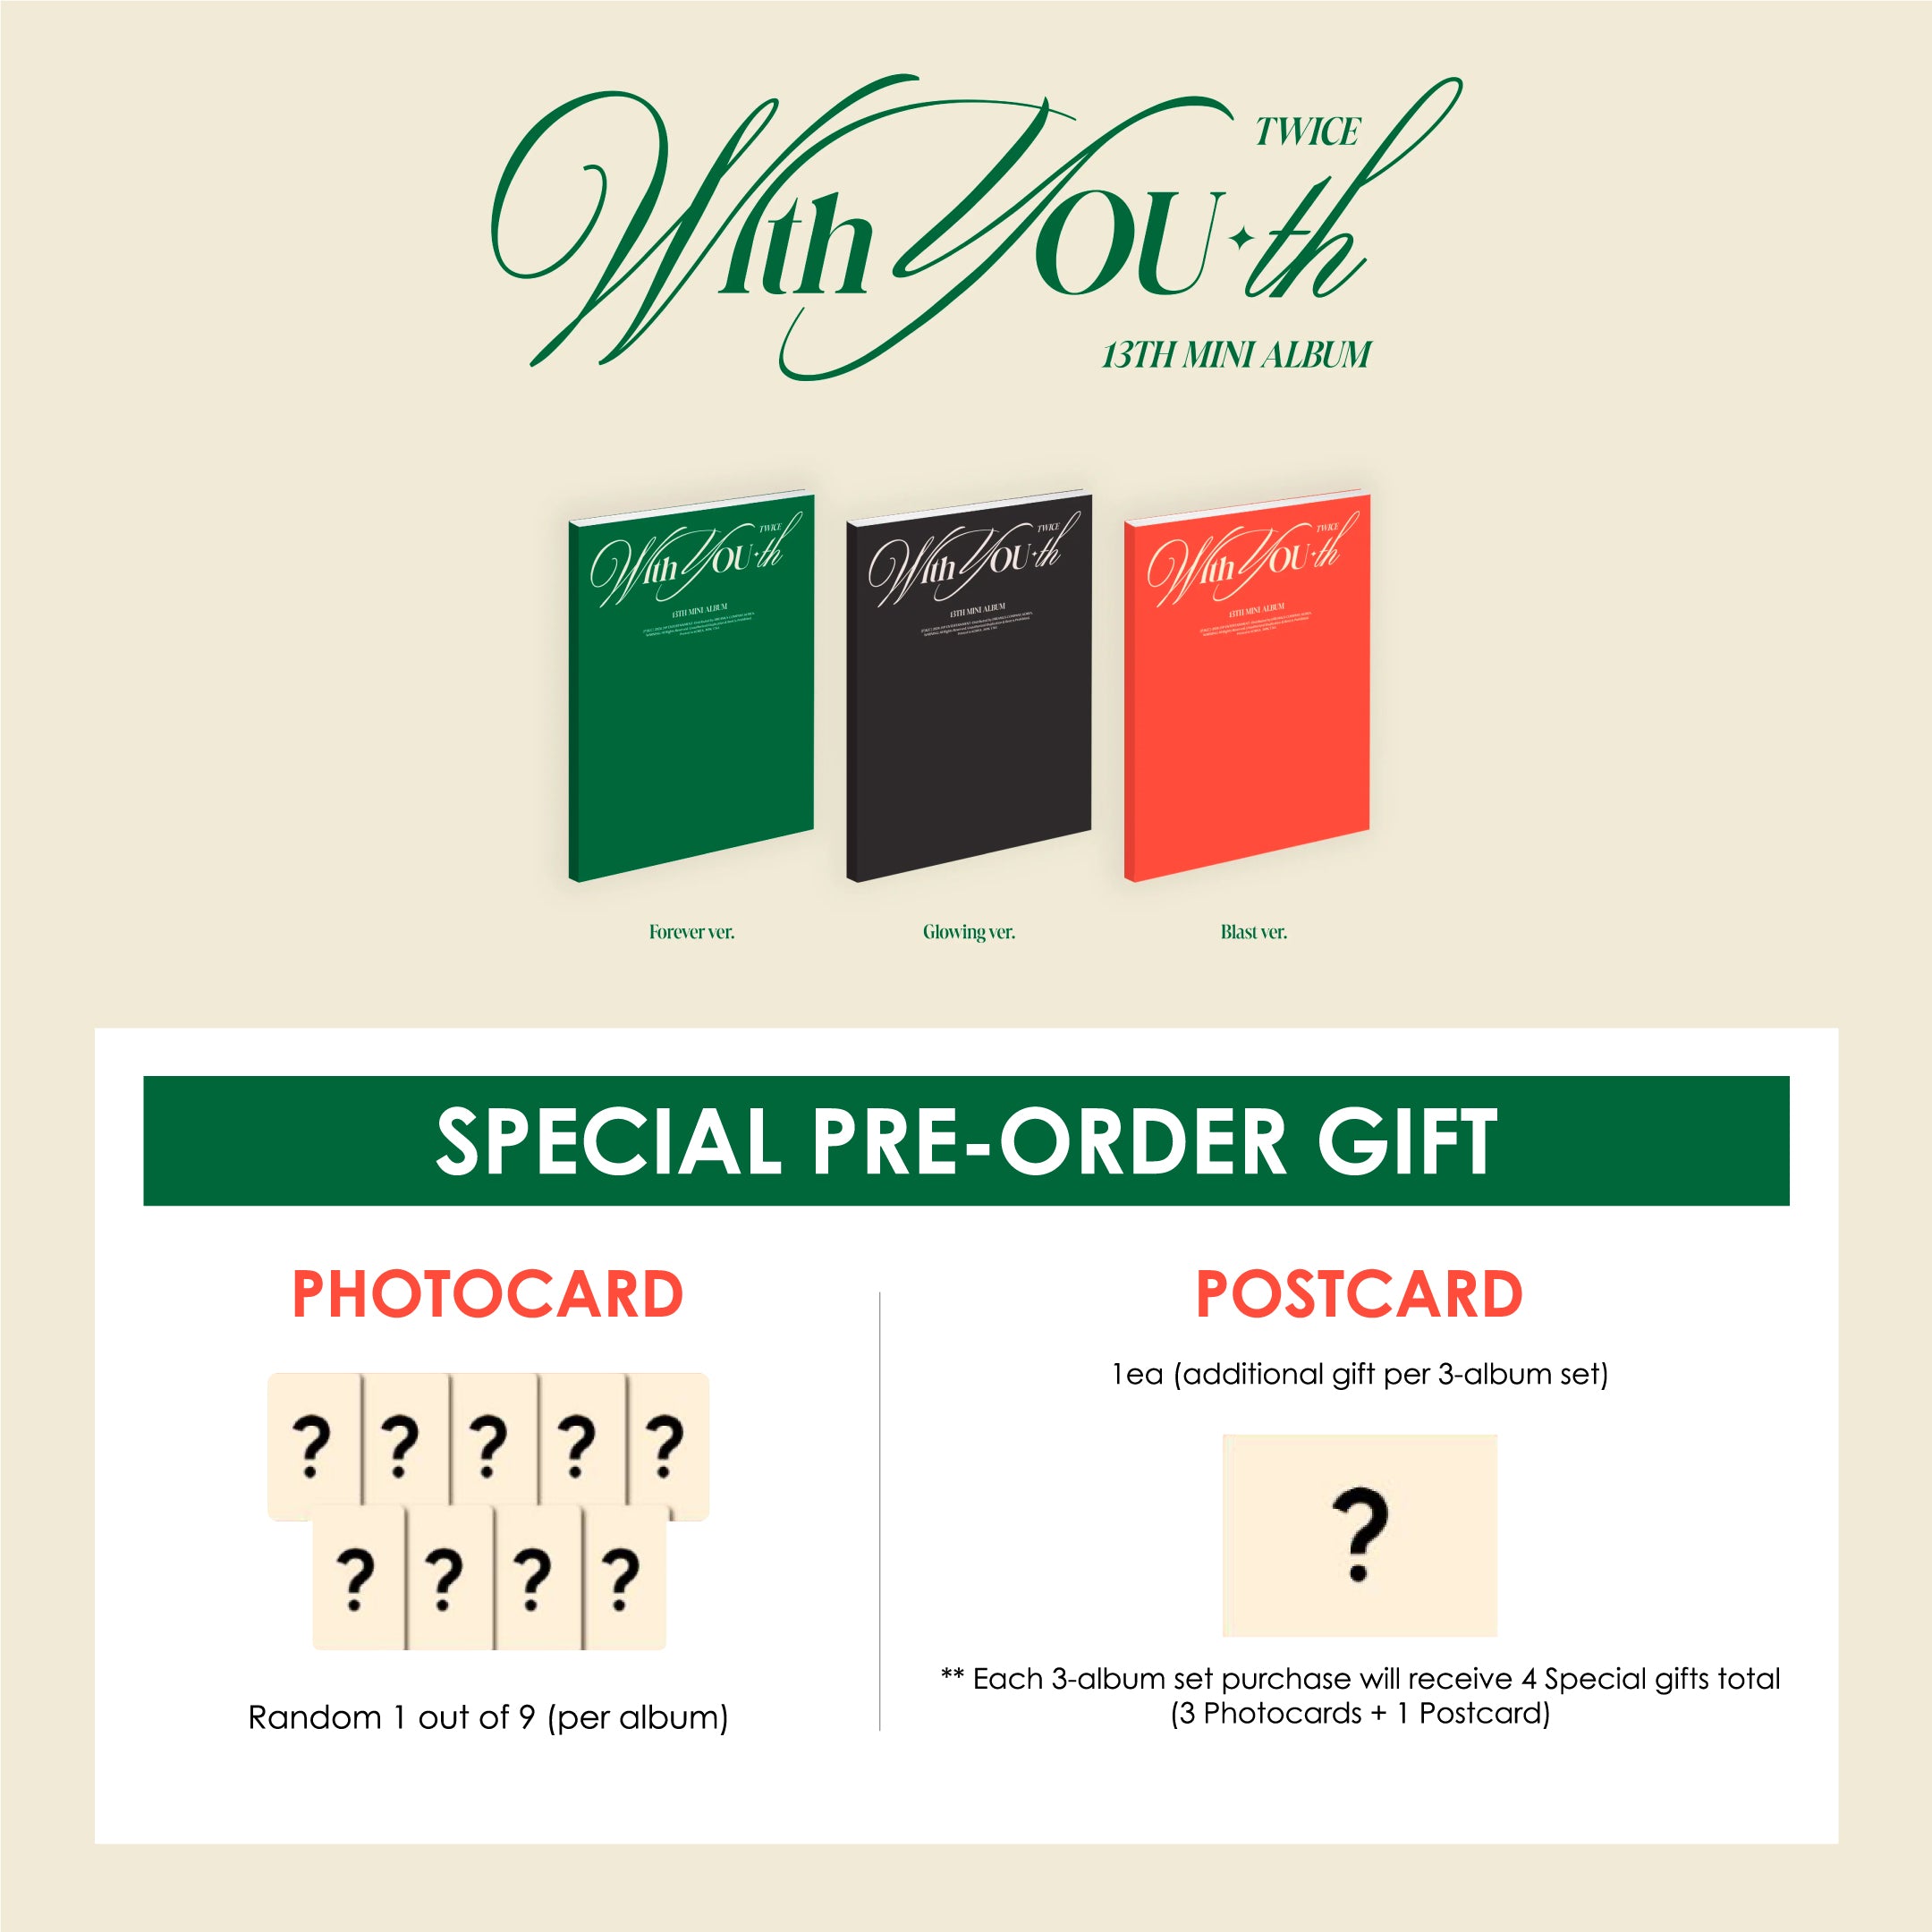 TWICE 13TH MINI ALBUM - WITH YOU-TH + SOUNDWAVE SPECIAL GIFT